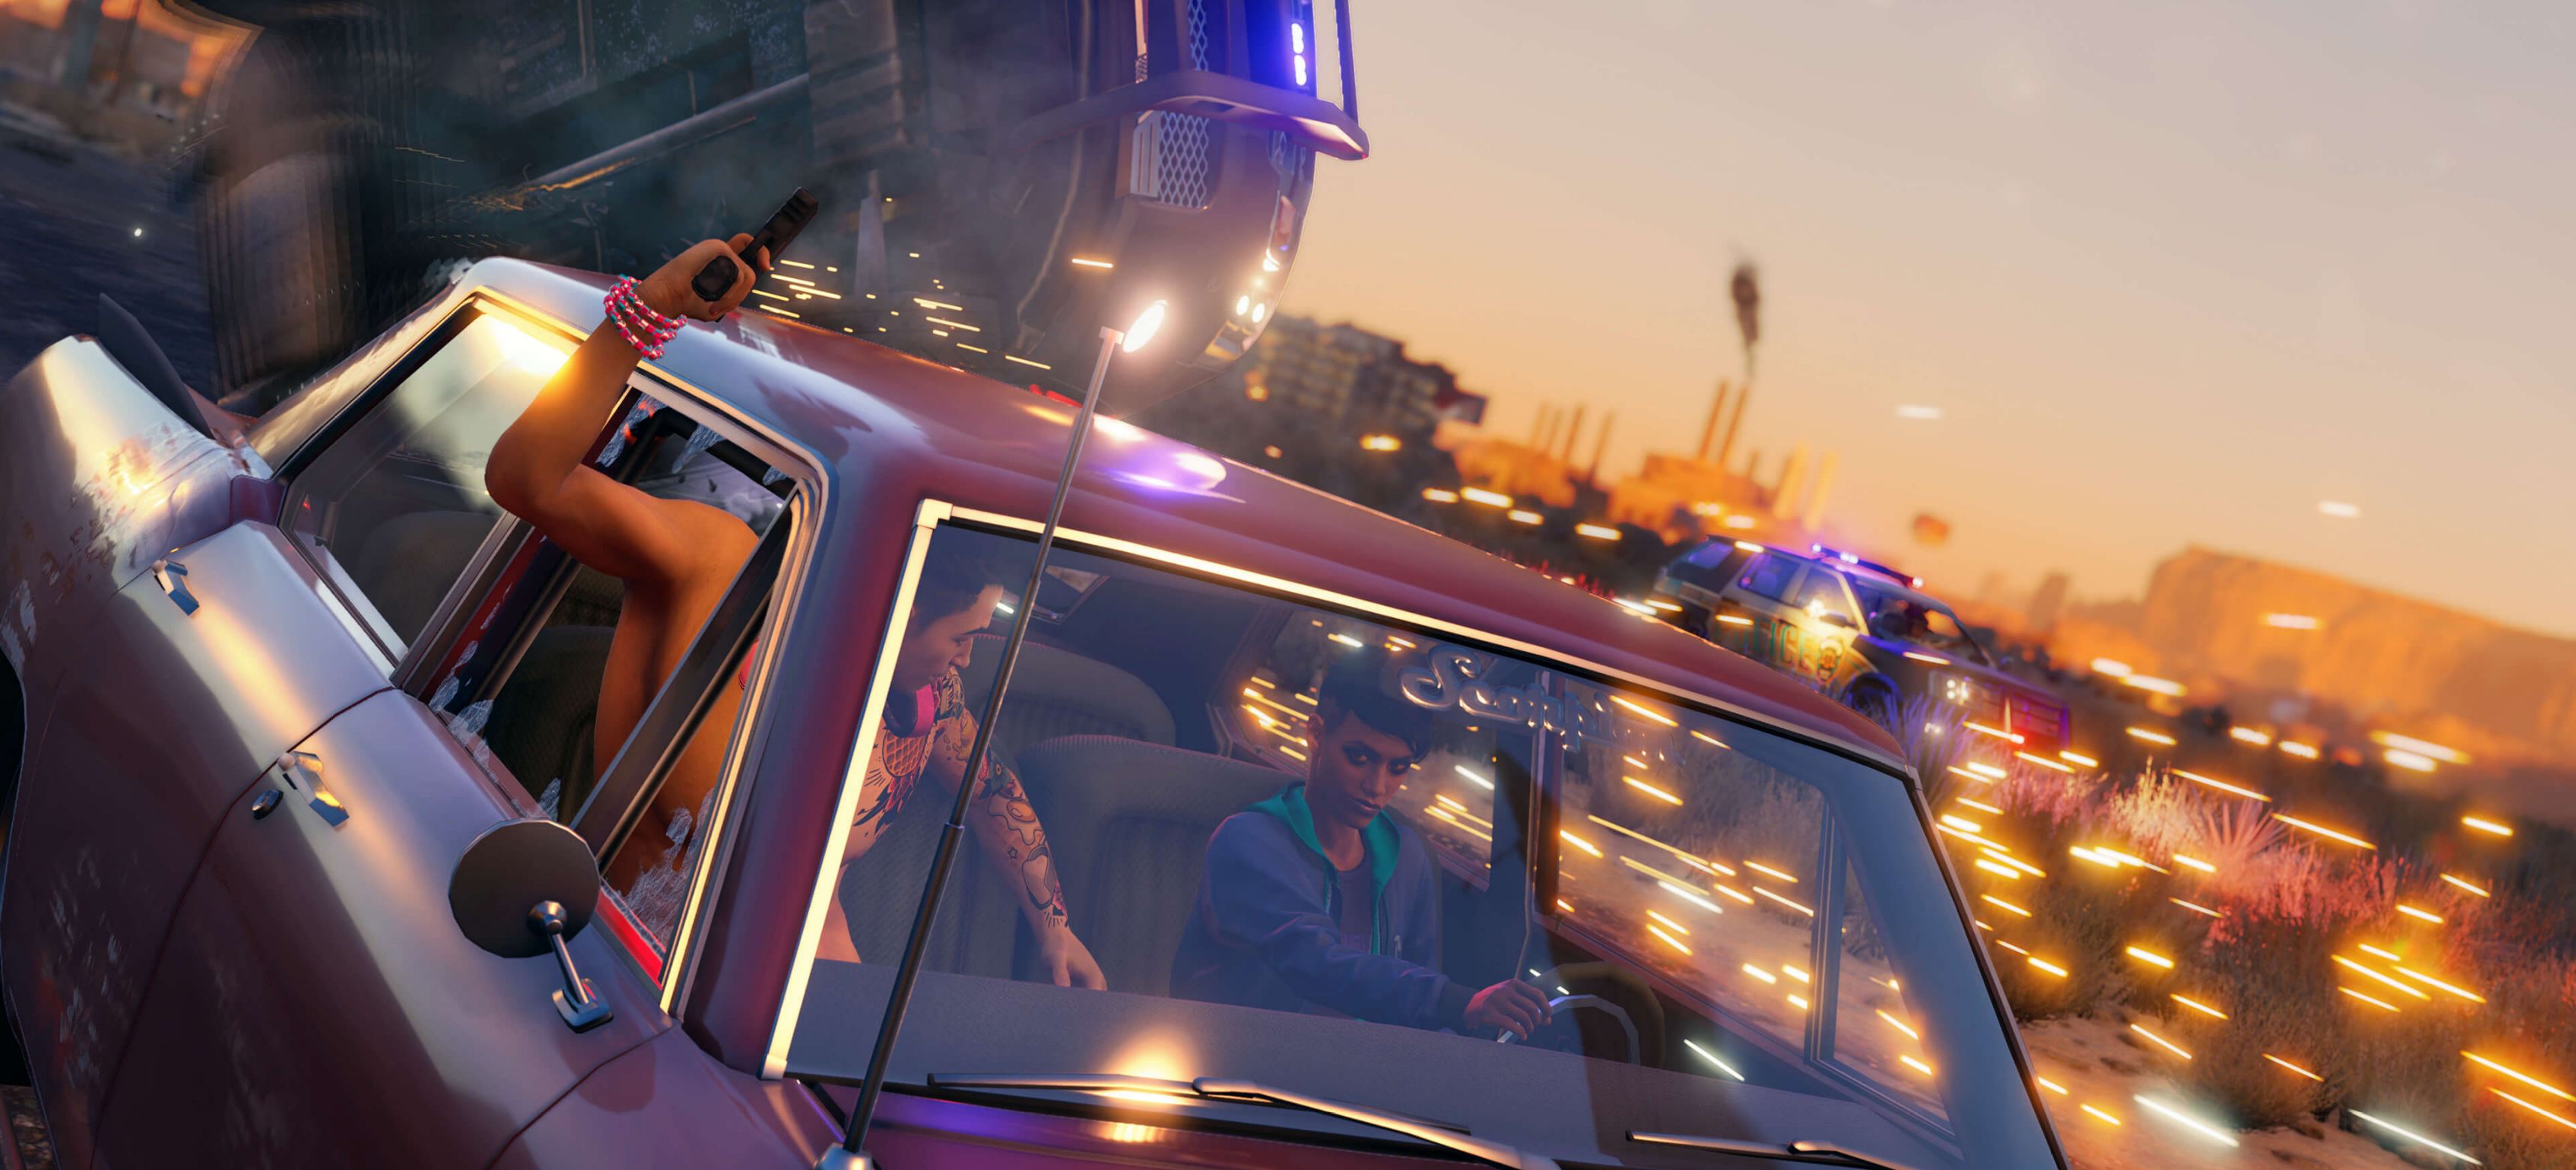 Saints Row 2022 Hands-On: Back and better than ever?